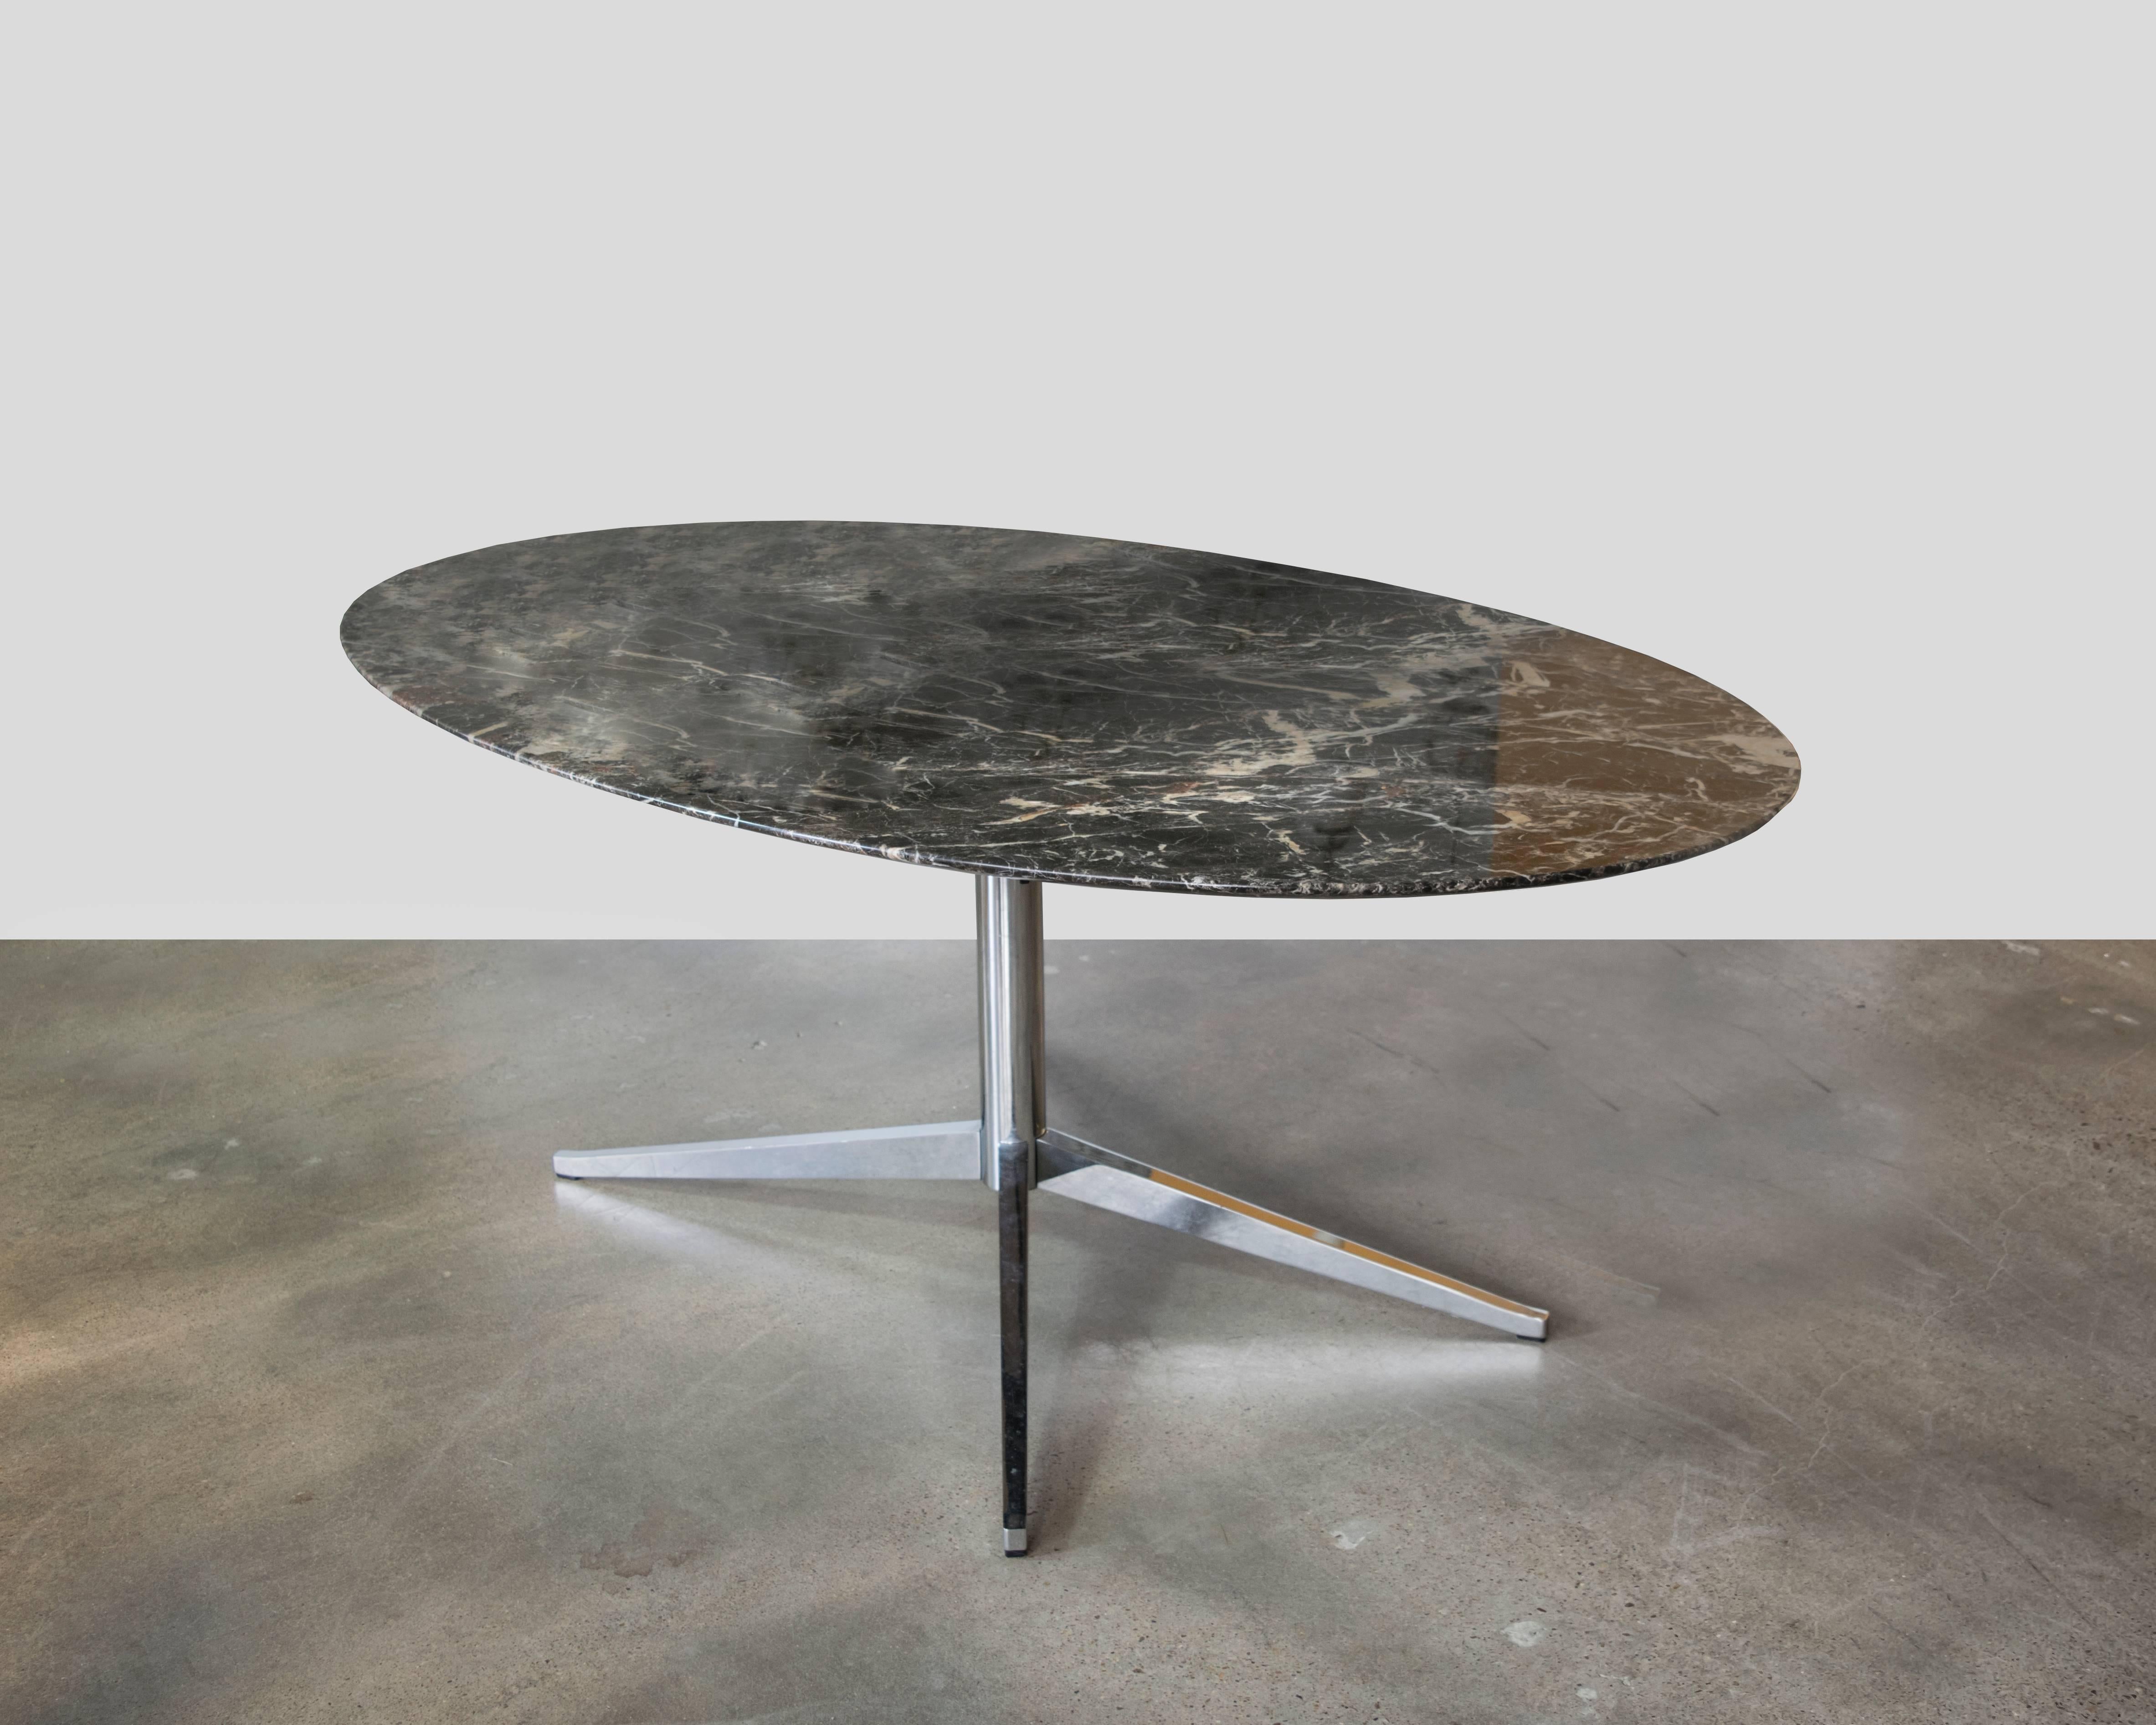 One of the most breathtaking marble tops ever on this classic Florence Knoll dining table or desk with chrome base. The marble is a combination of black, gold, beige and brick colors with intricate veining. An absolute knockout piece.